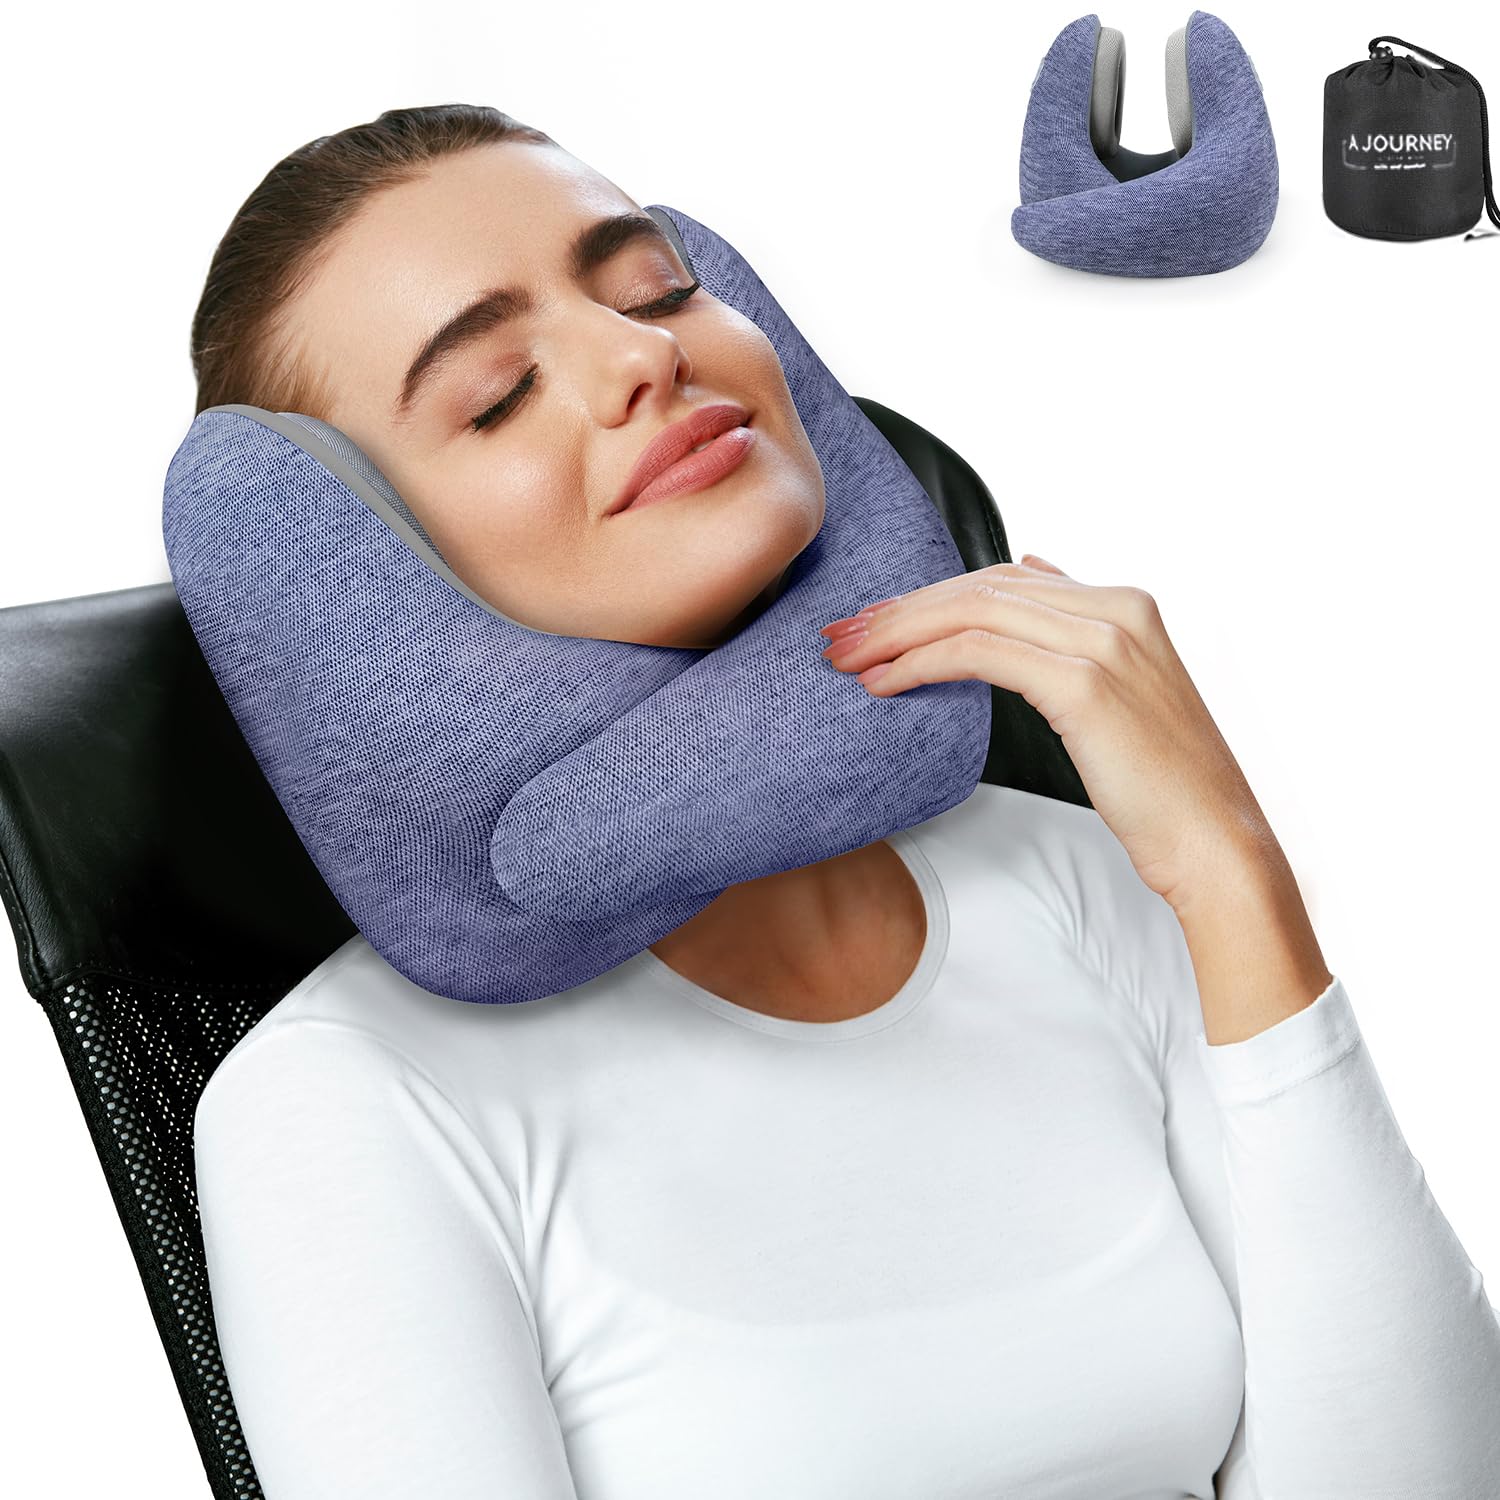 SOUTHVO Travel Pillow Noise Cancelling for Neck Support, 100% Pure Memory Foam Neck Pillow with Noise Cancelling Earmuffs for Traveling, Removable Washable Cover (L, deep Blue)